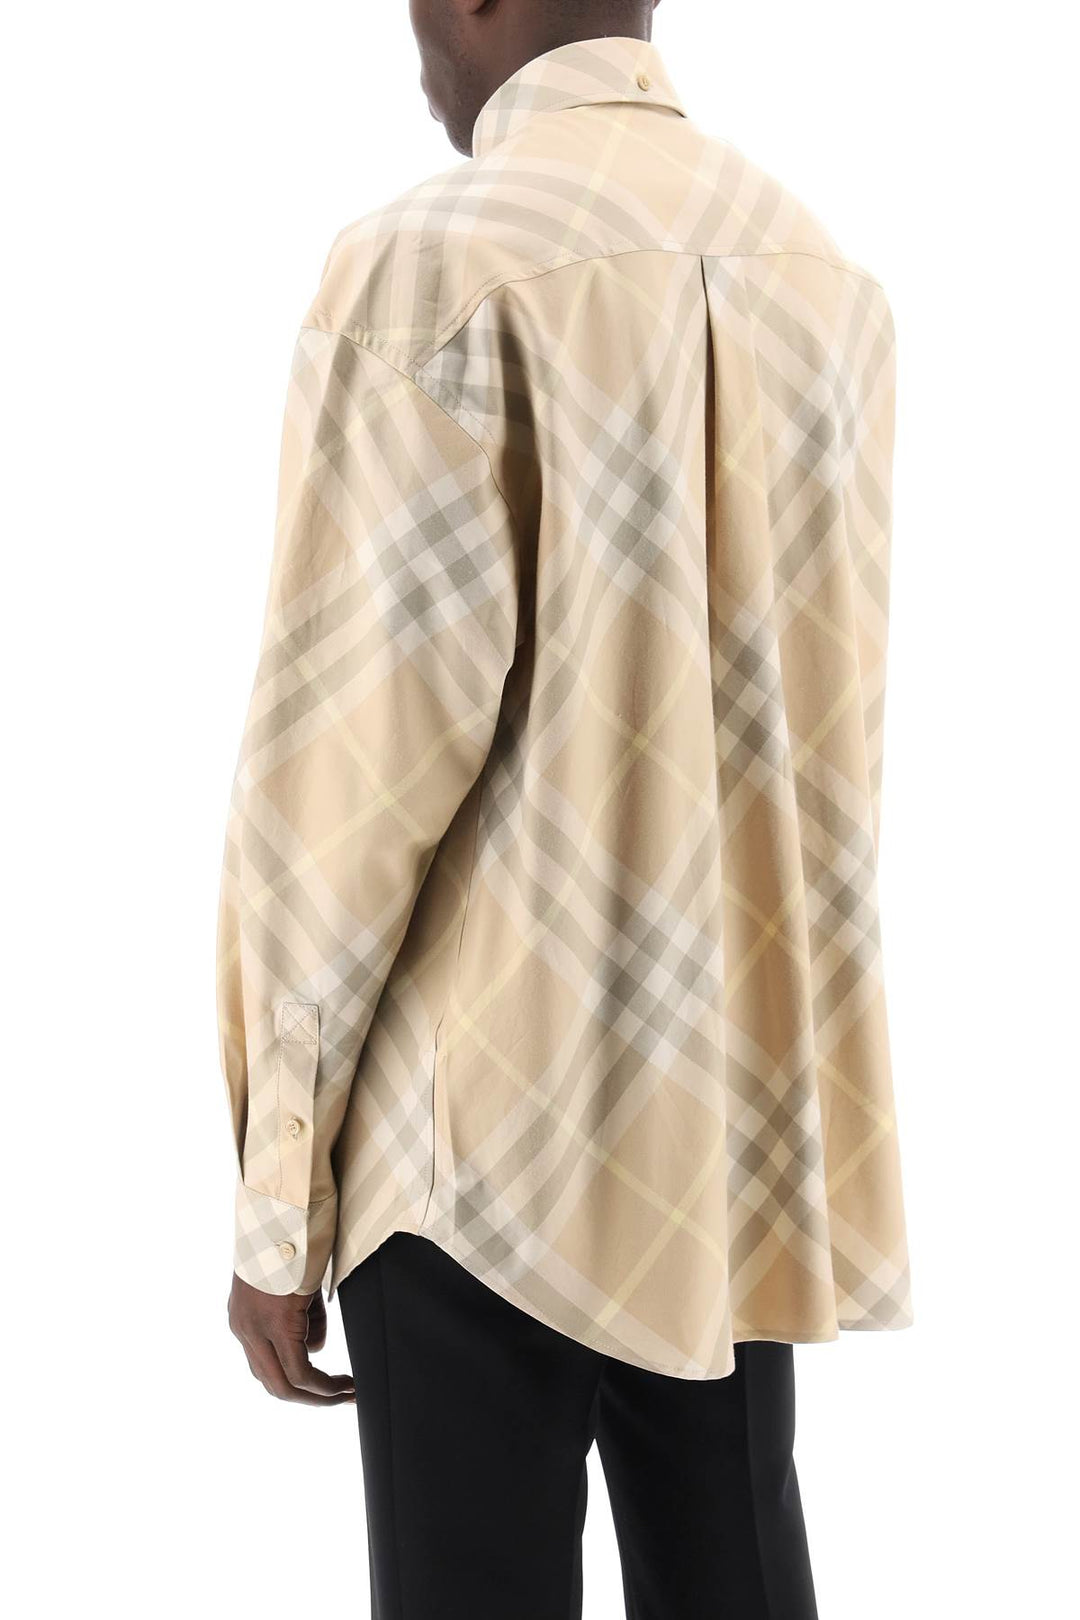 Burberry Replace With Double Quoteorganic Cotton Checkered Shirt   Beige